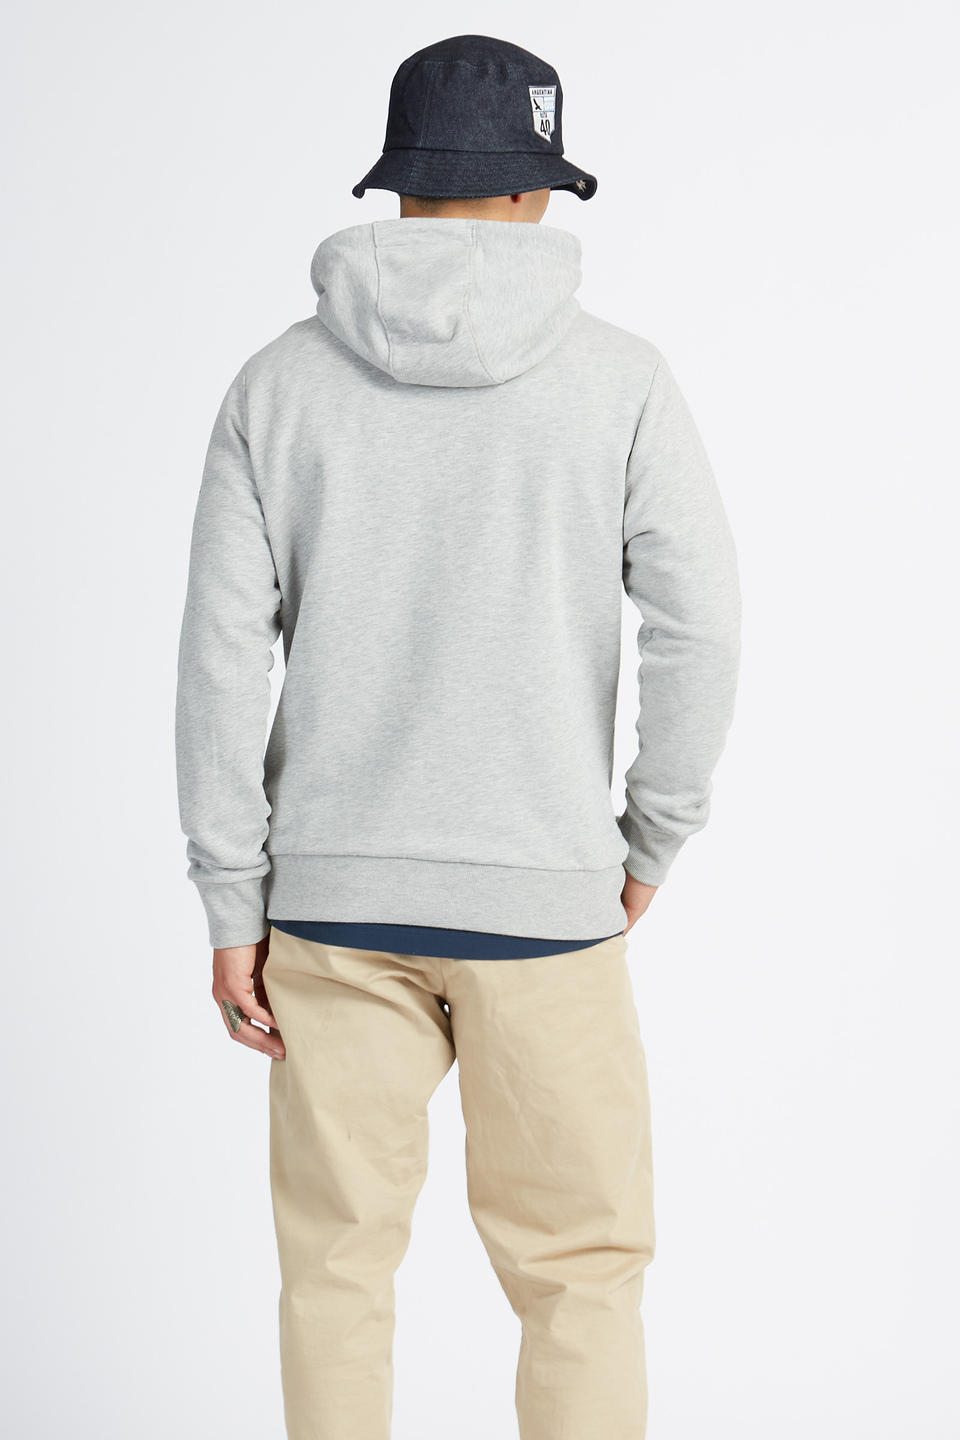 Polo Academy men's full-zip sweatshirt with hood and drawstrings in solid color with logo on the shoulder - Vanek | La Martina - Official Online Shop